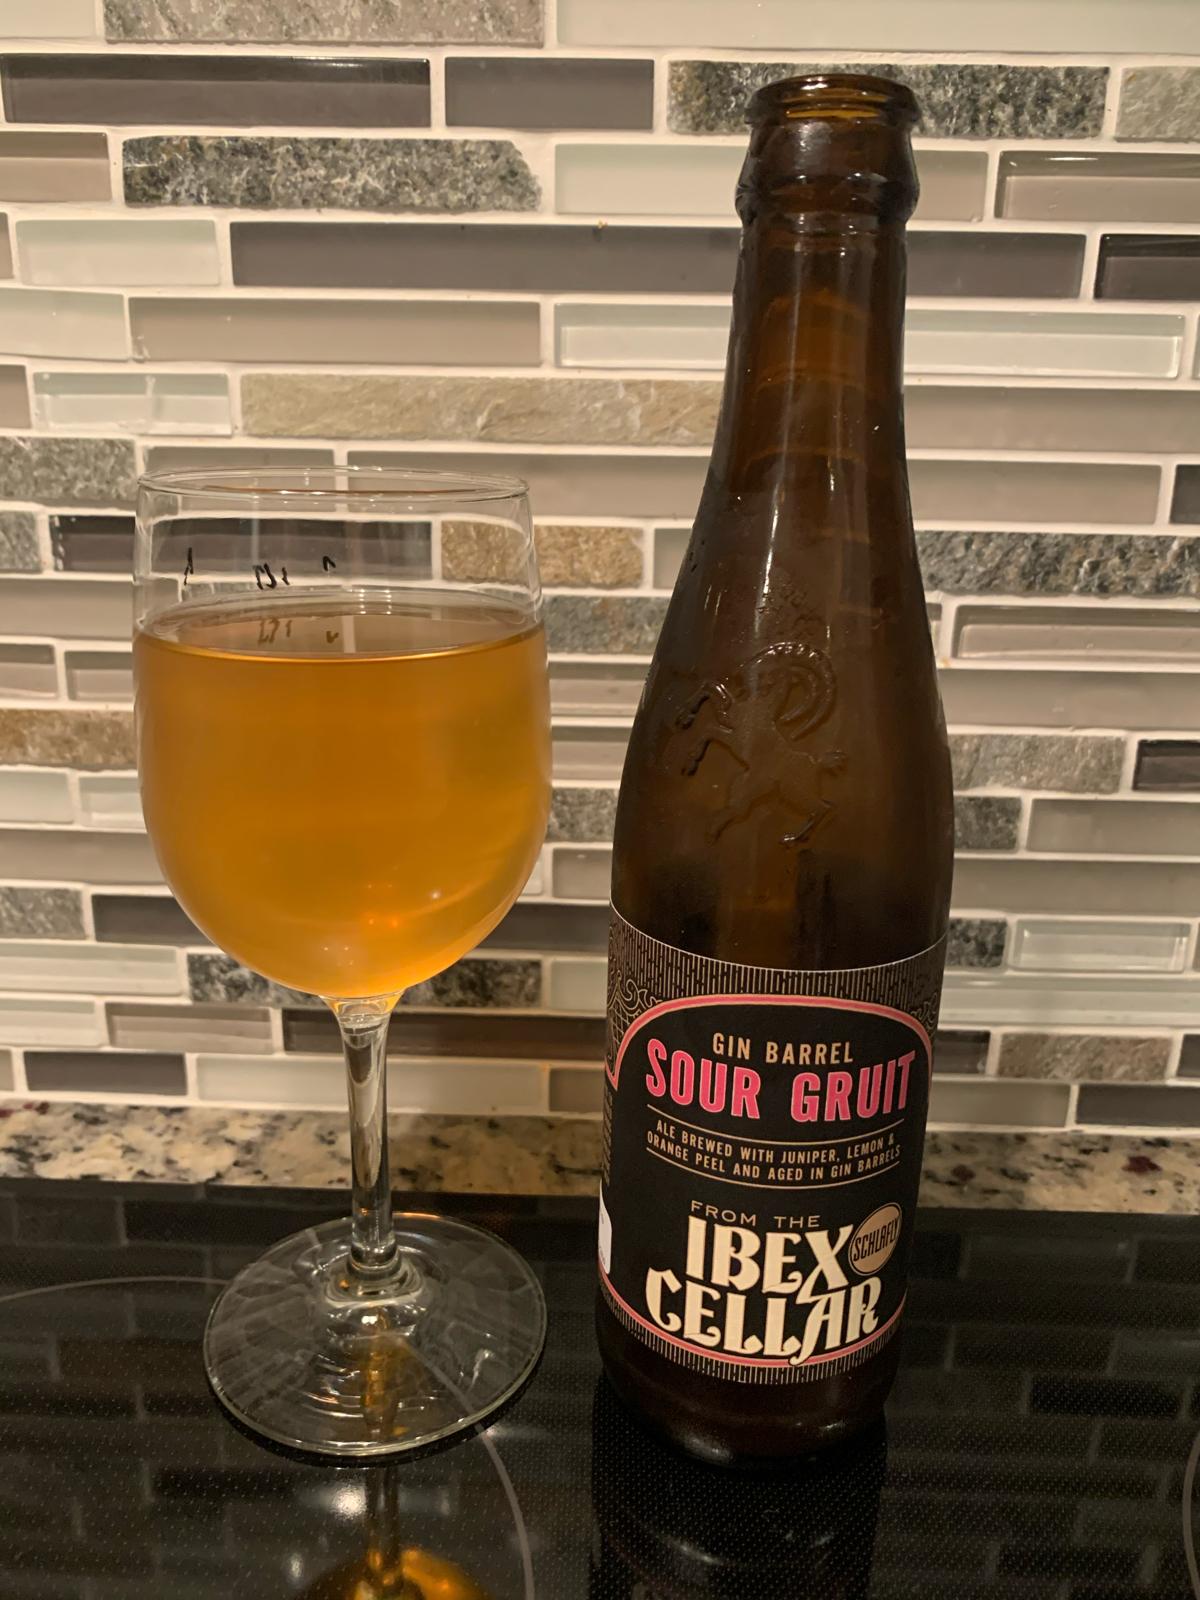 From the Ibex Cellar: Gin Barrel Sour Gruit